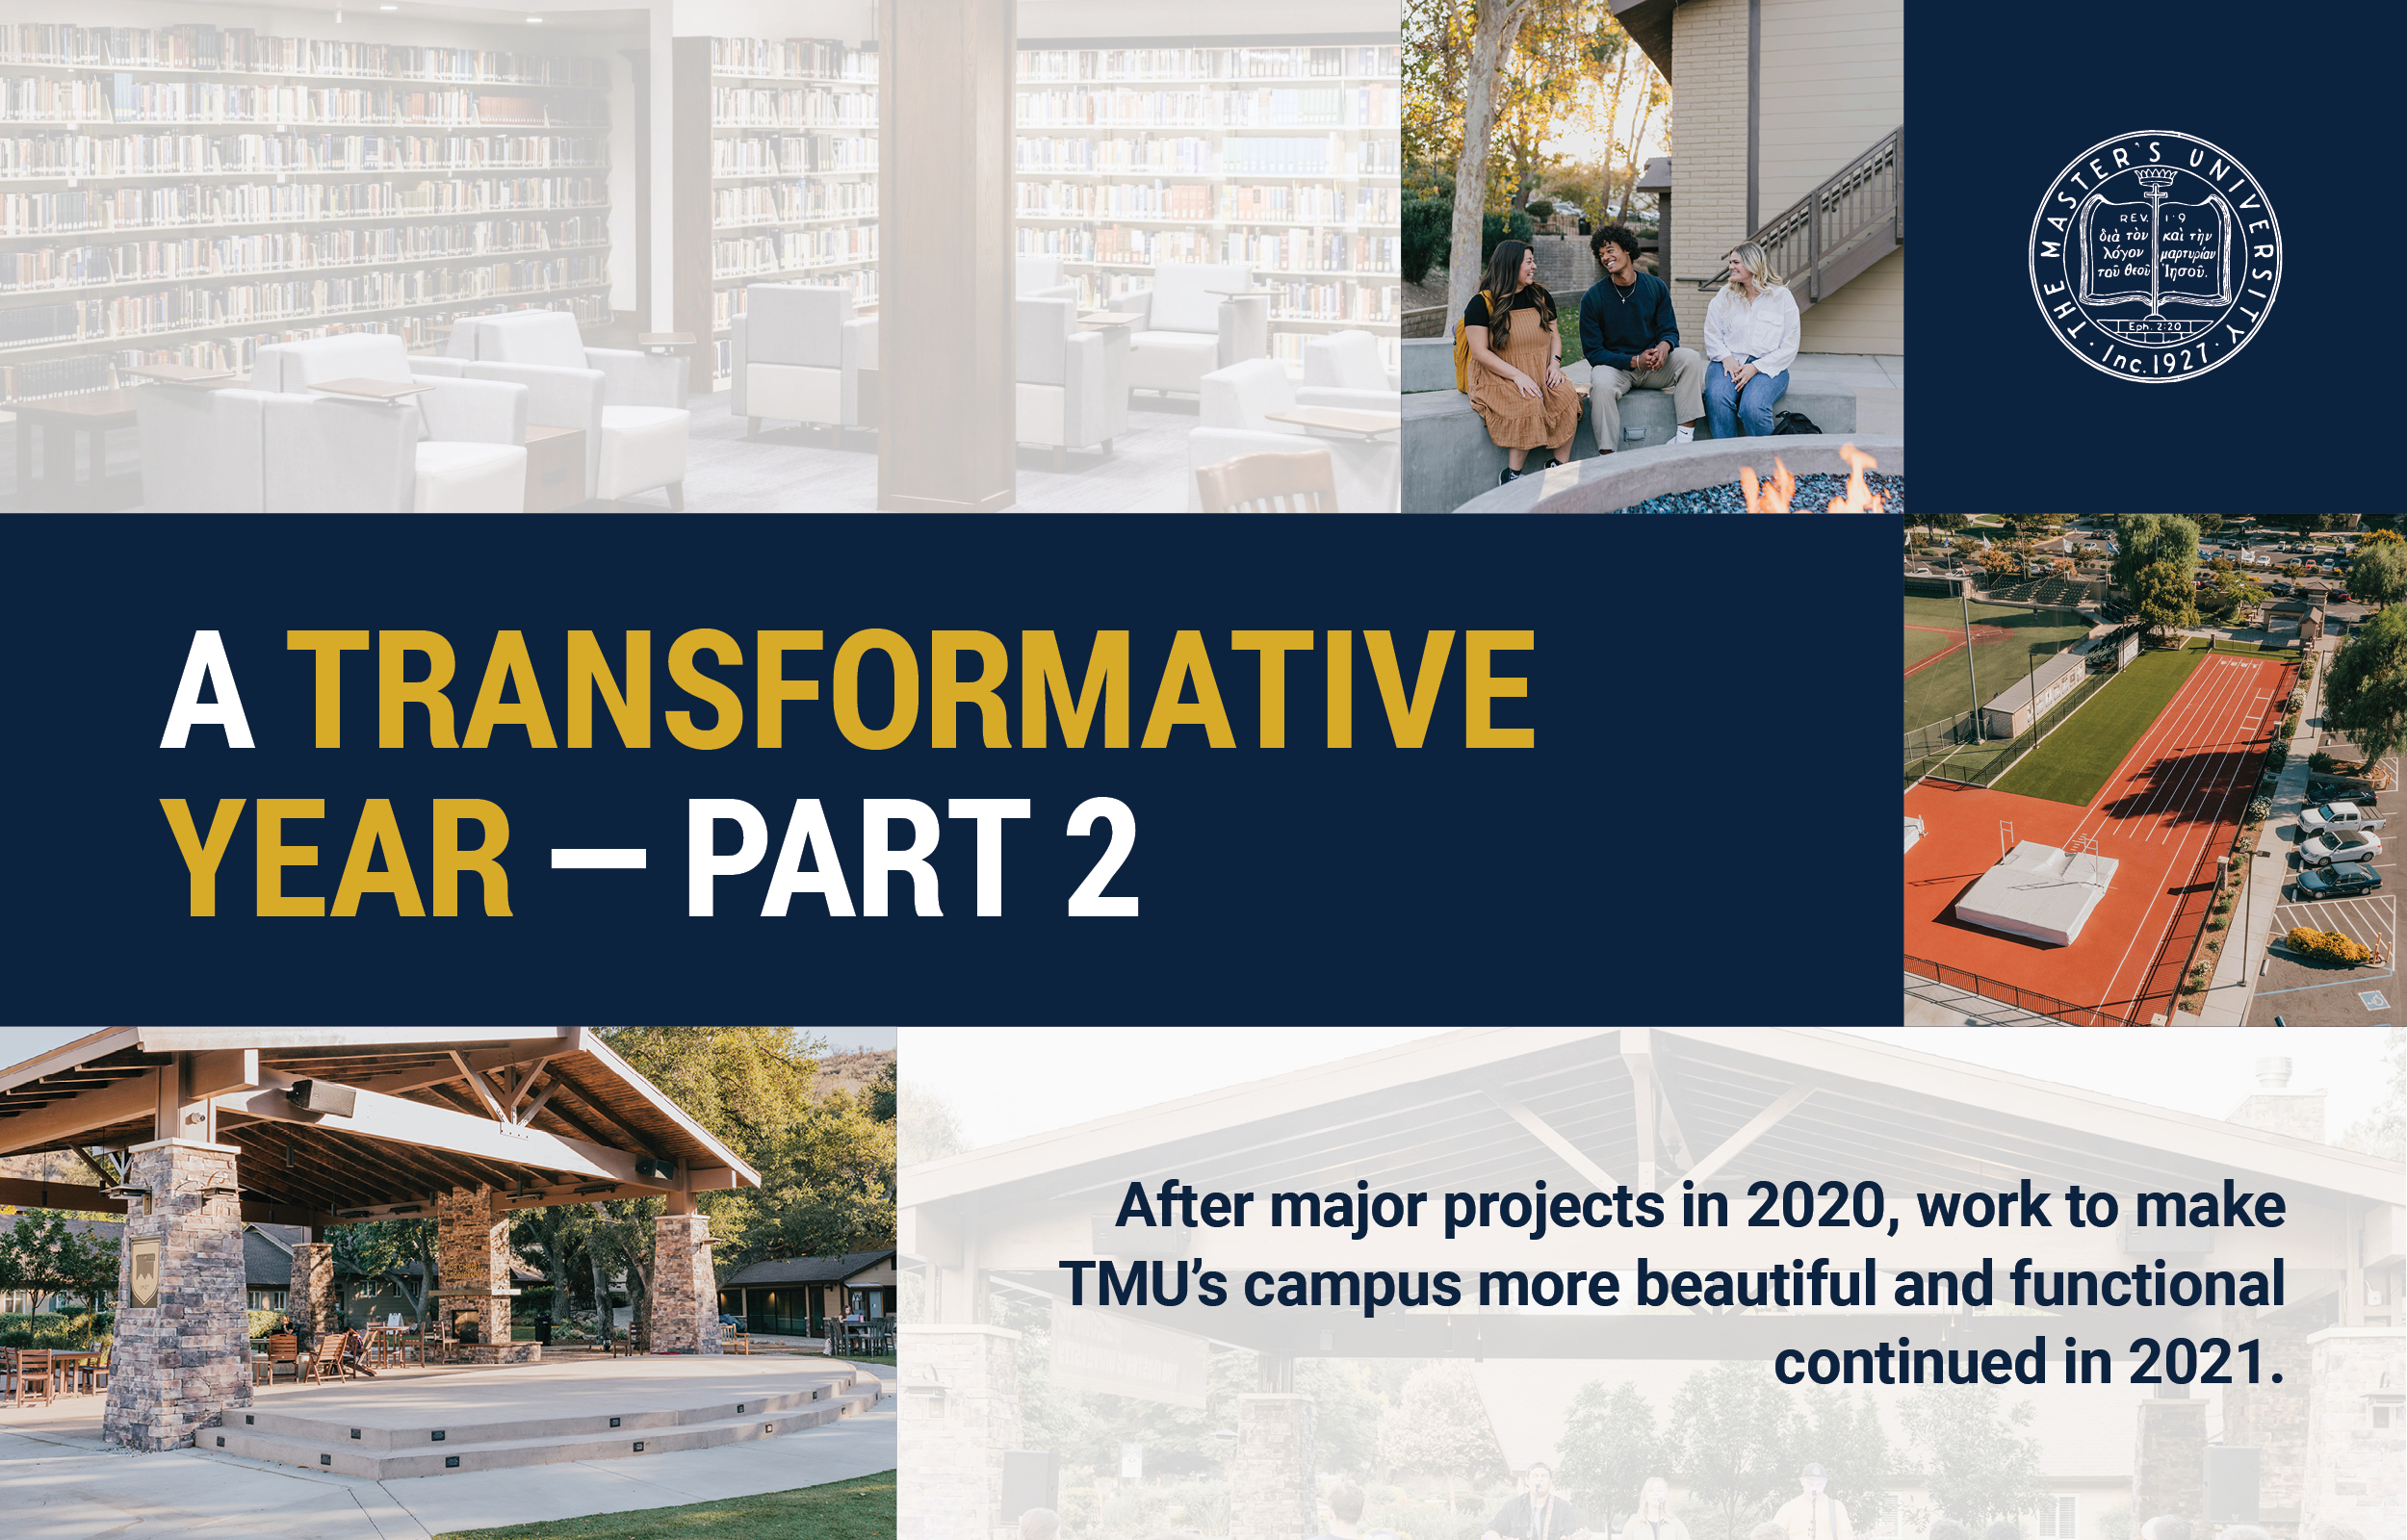 The Transformation of TMU’s Campus Continued in 2021 Featured Image